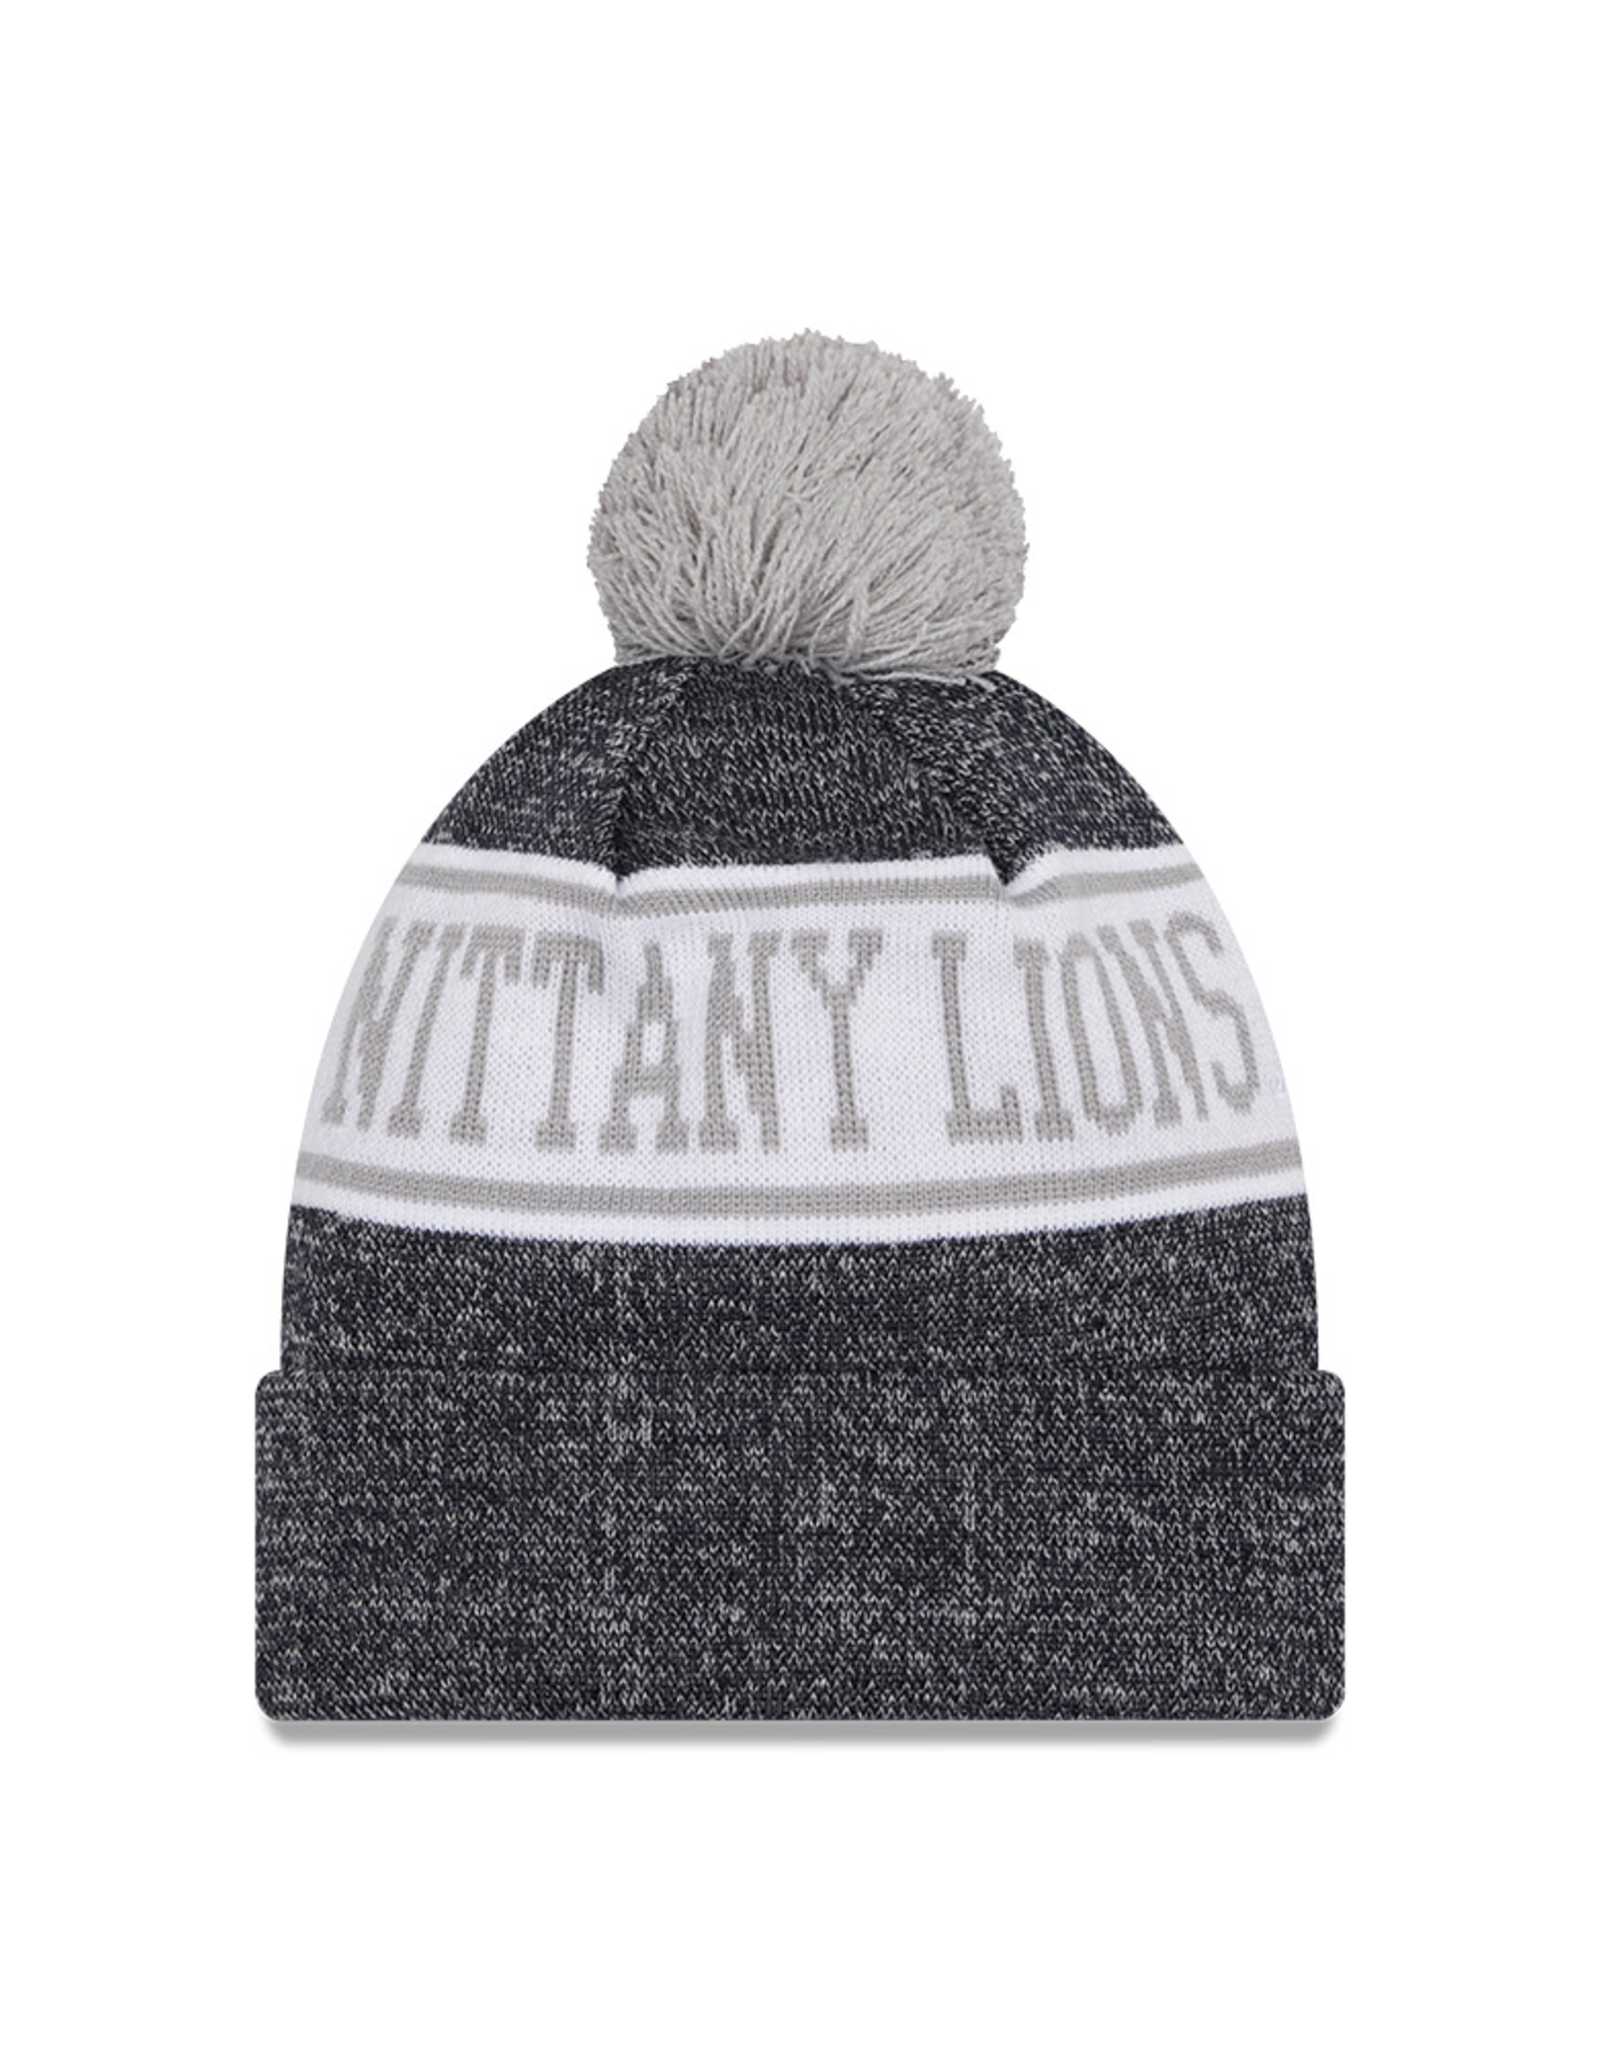 Penn State Nittany Lions Banner Knit Hat